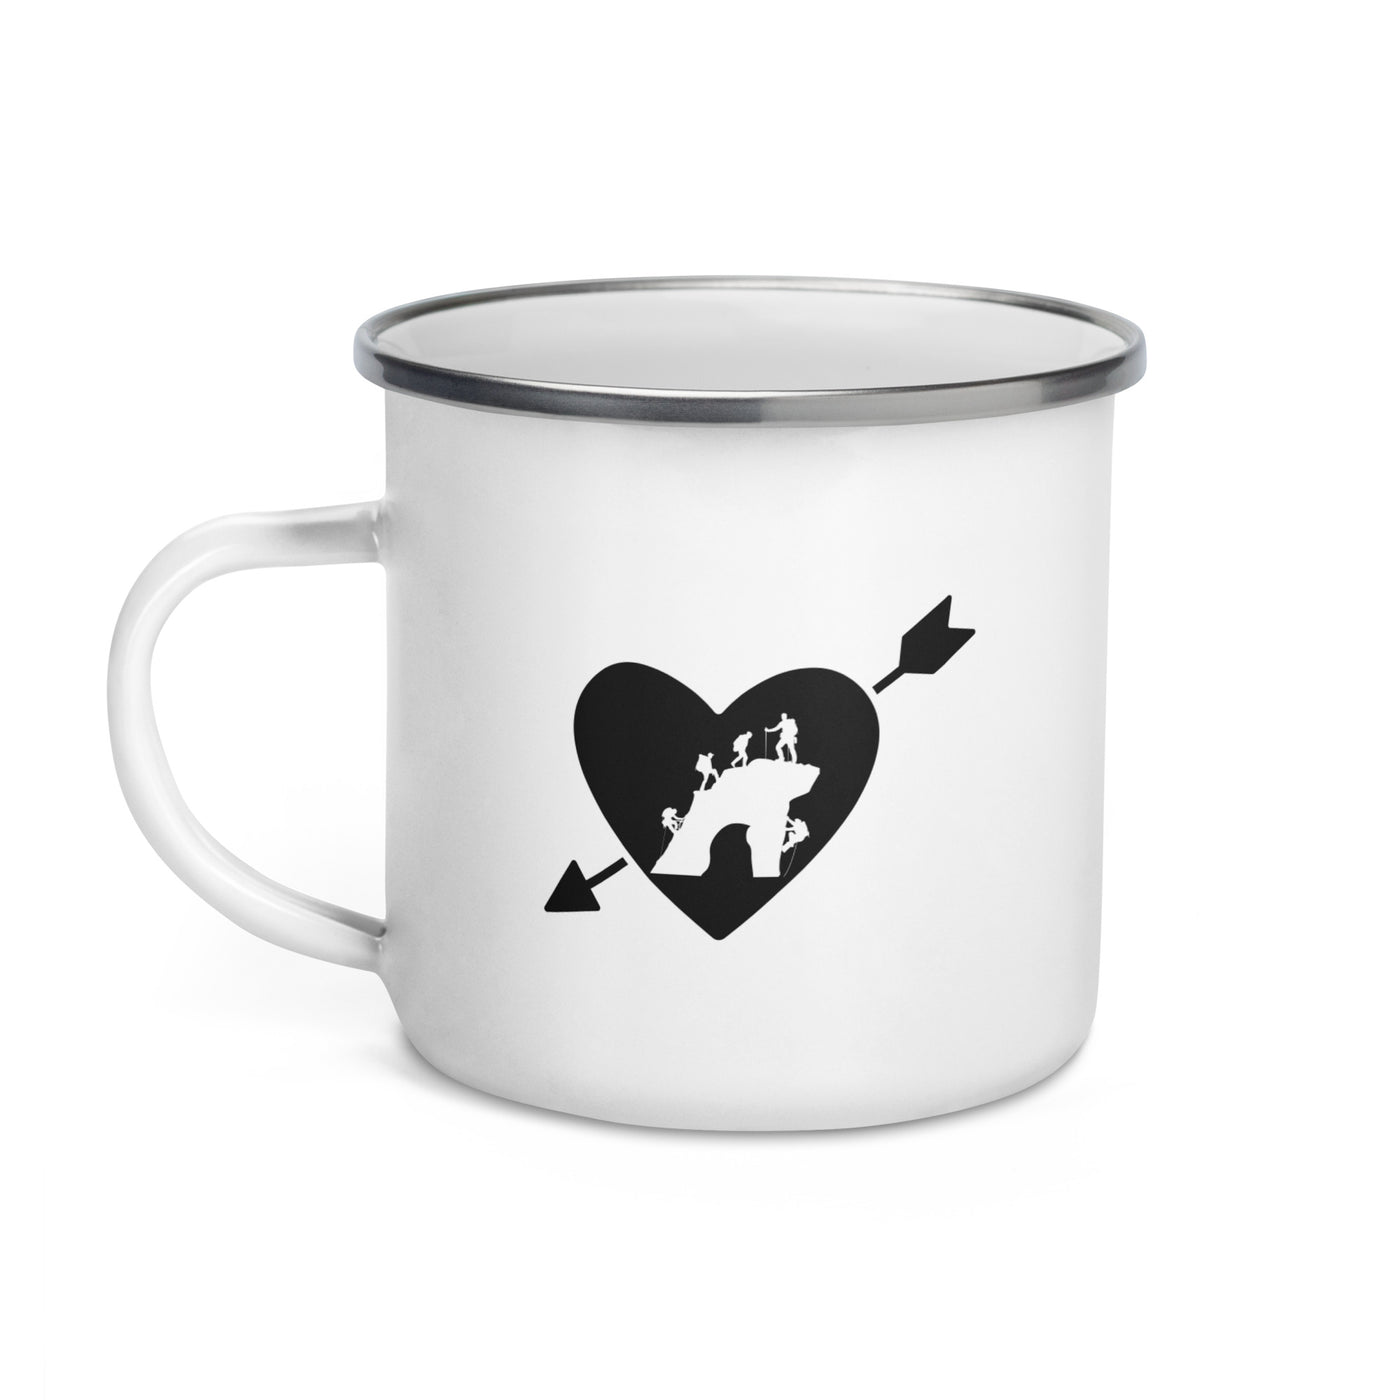 Arrow Heart And Climbing - Emaille Tasse klettern